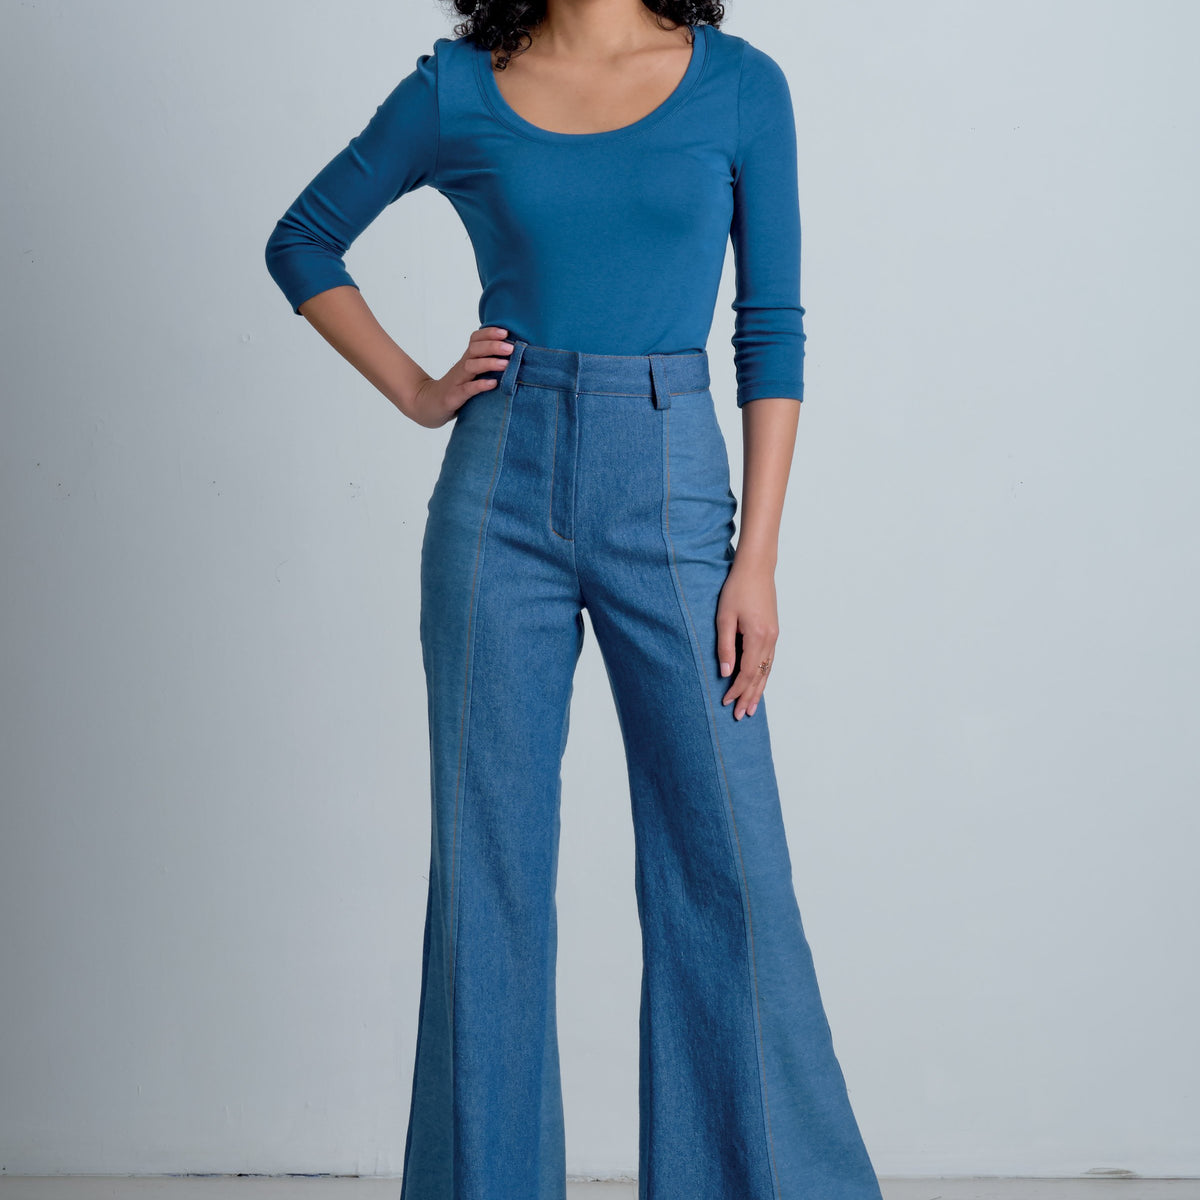 McCall's Sewing Pattern 8007 Misses' Flares — jaycotts.co.uk - Sewing ...